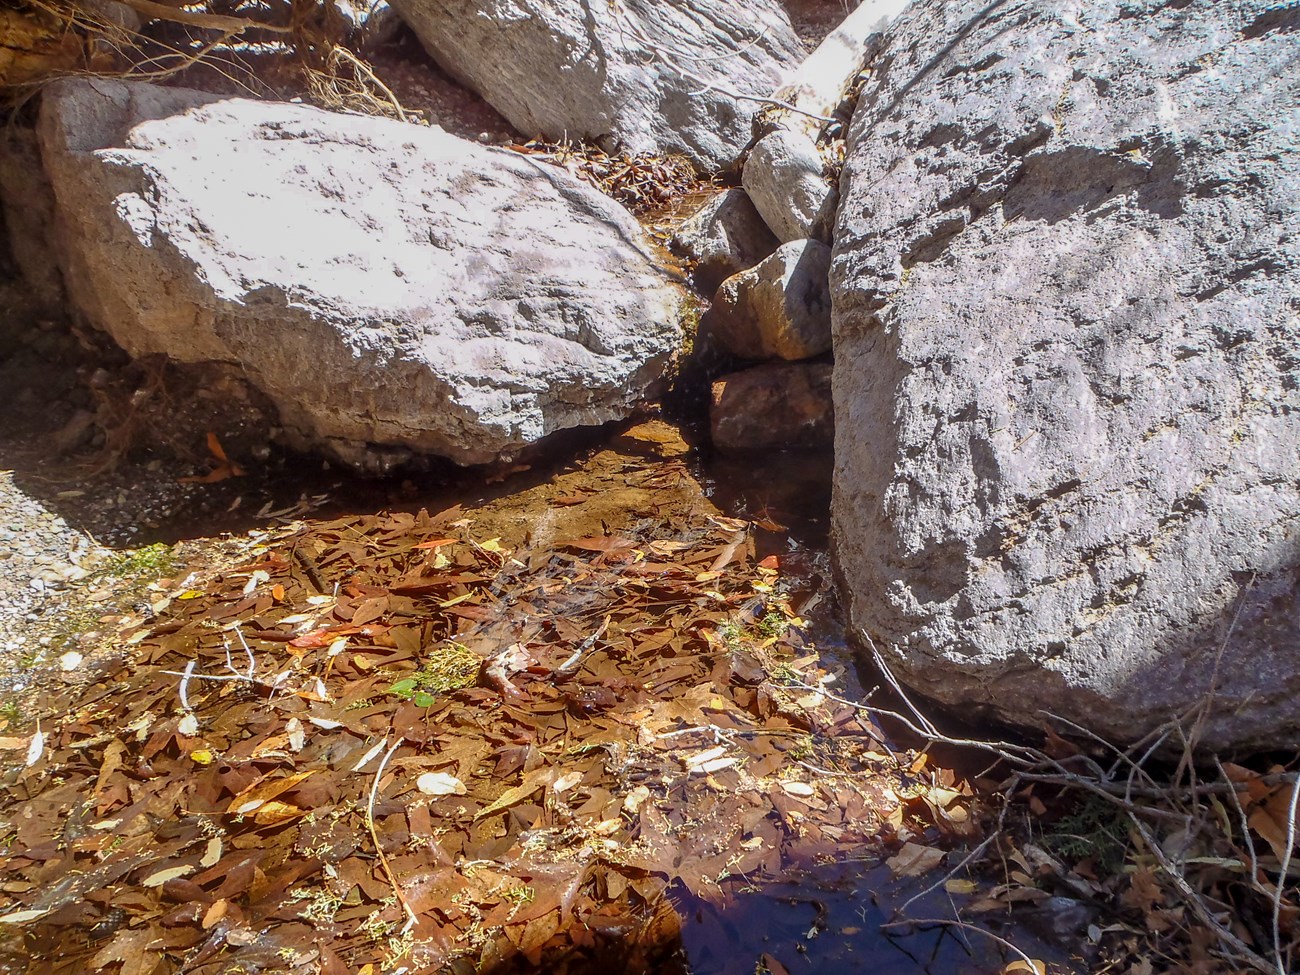 Between three white boulders emerges a wide pool of water. Brown leaves cover the bottom of the pool.